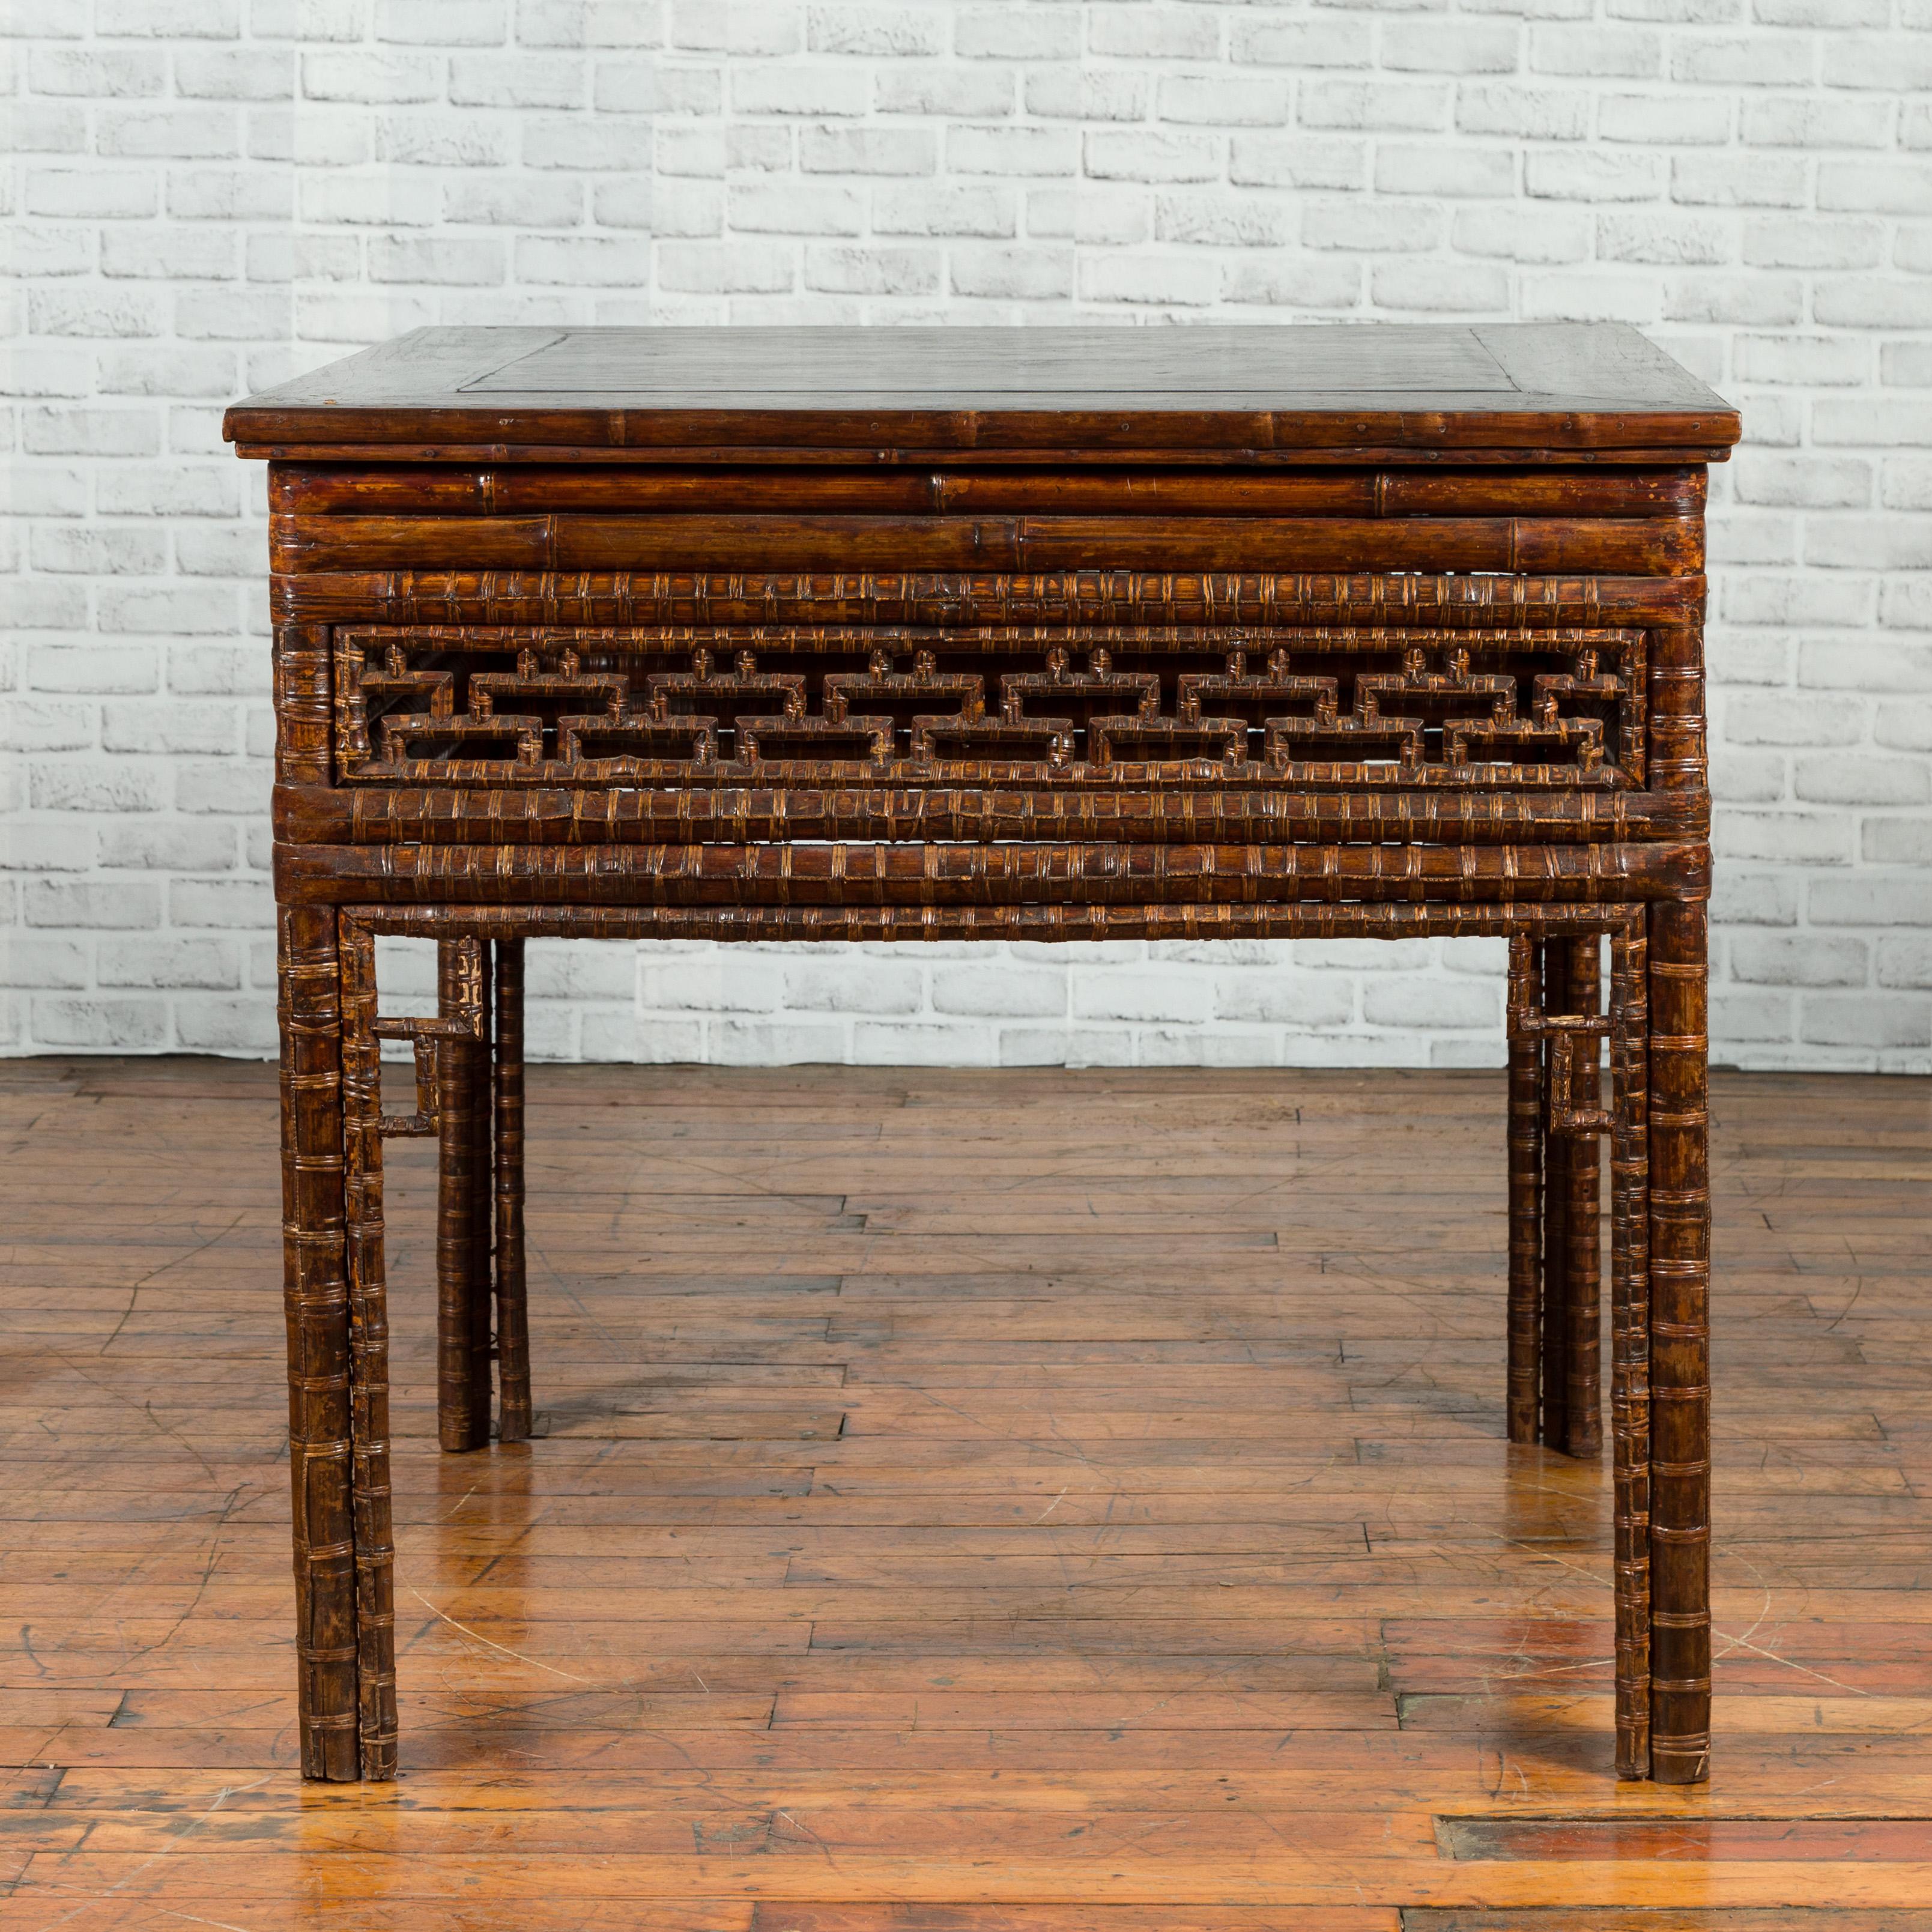 Chinese Qing Dynasty Period 19th Century Bamboo Hall Table with Fretwork Motifs In Good Condition For Sale In Yonkers, NY